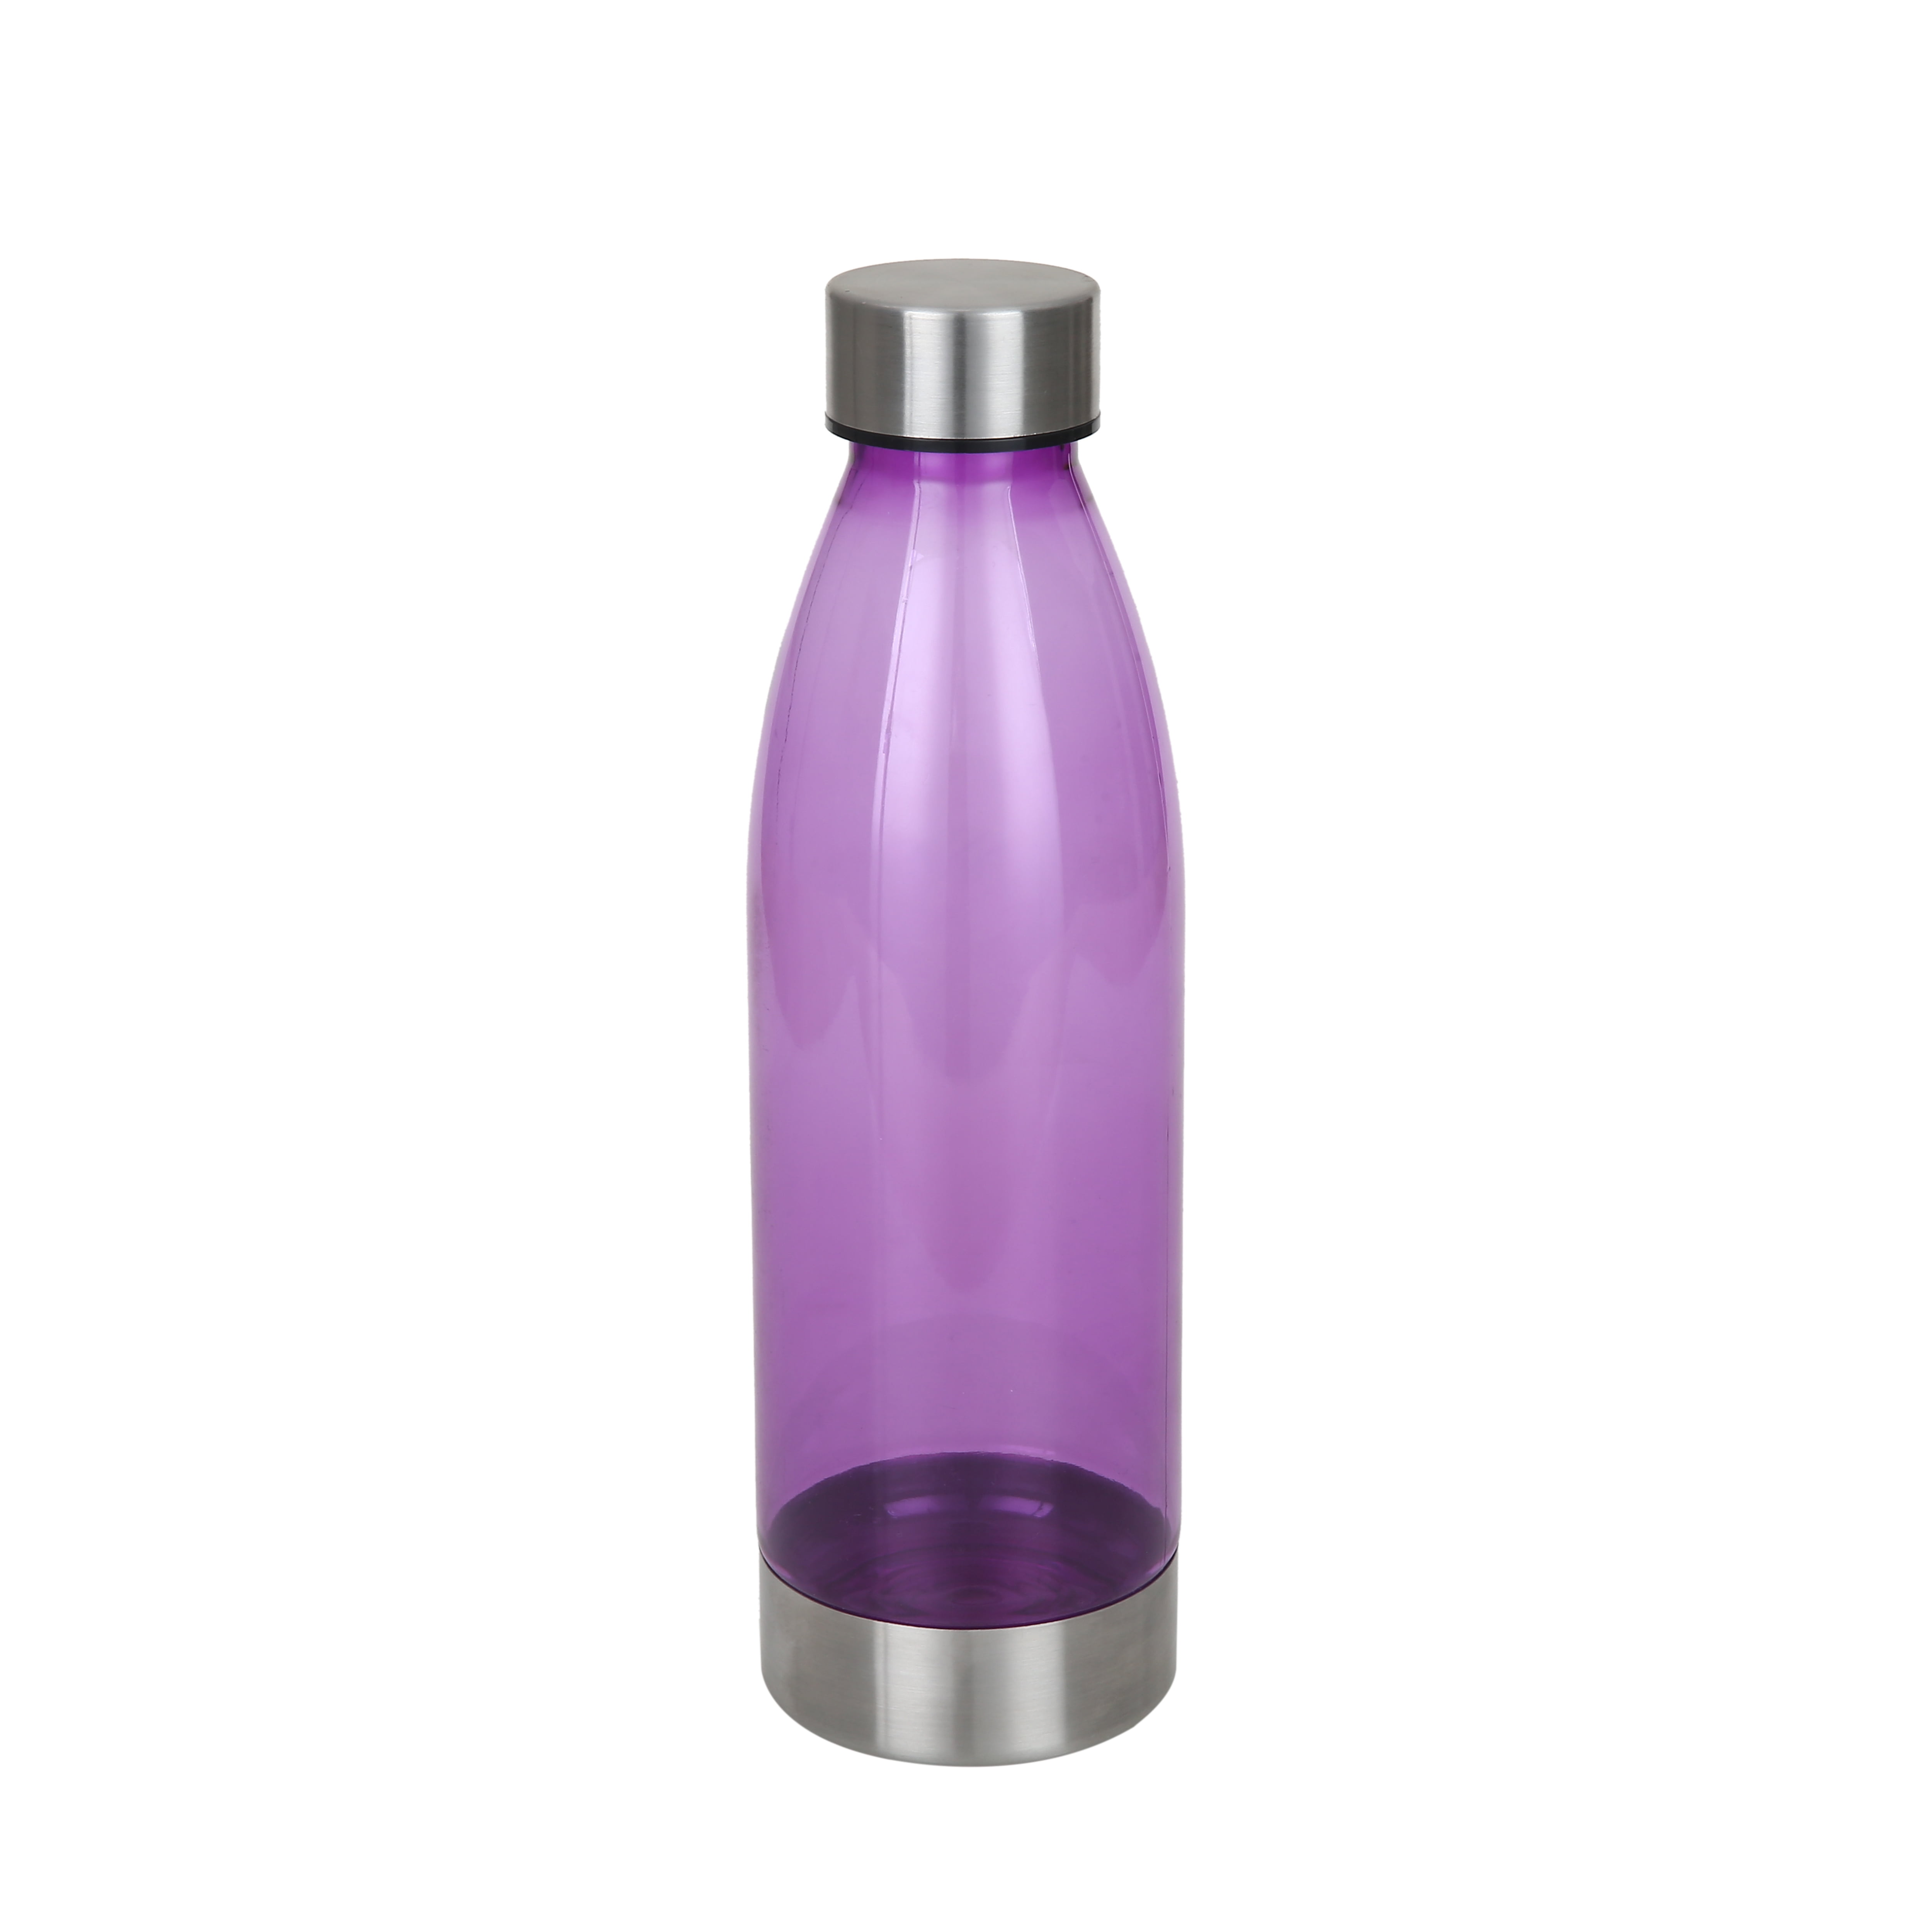 Mainstays 22-ounce Purple Plastic Water Bottle with Stainless